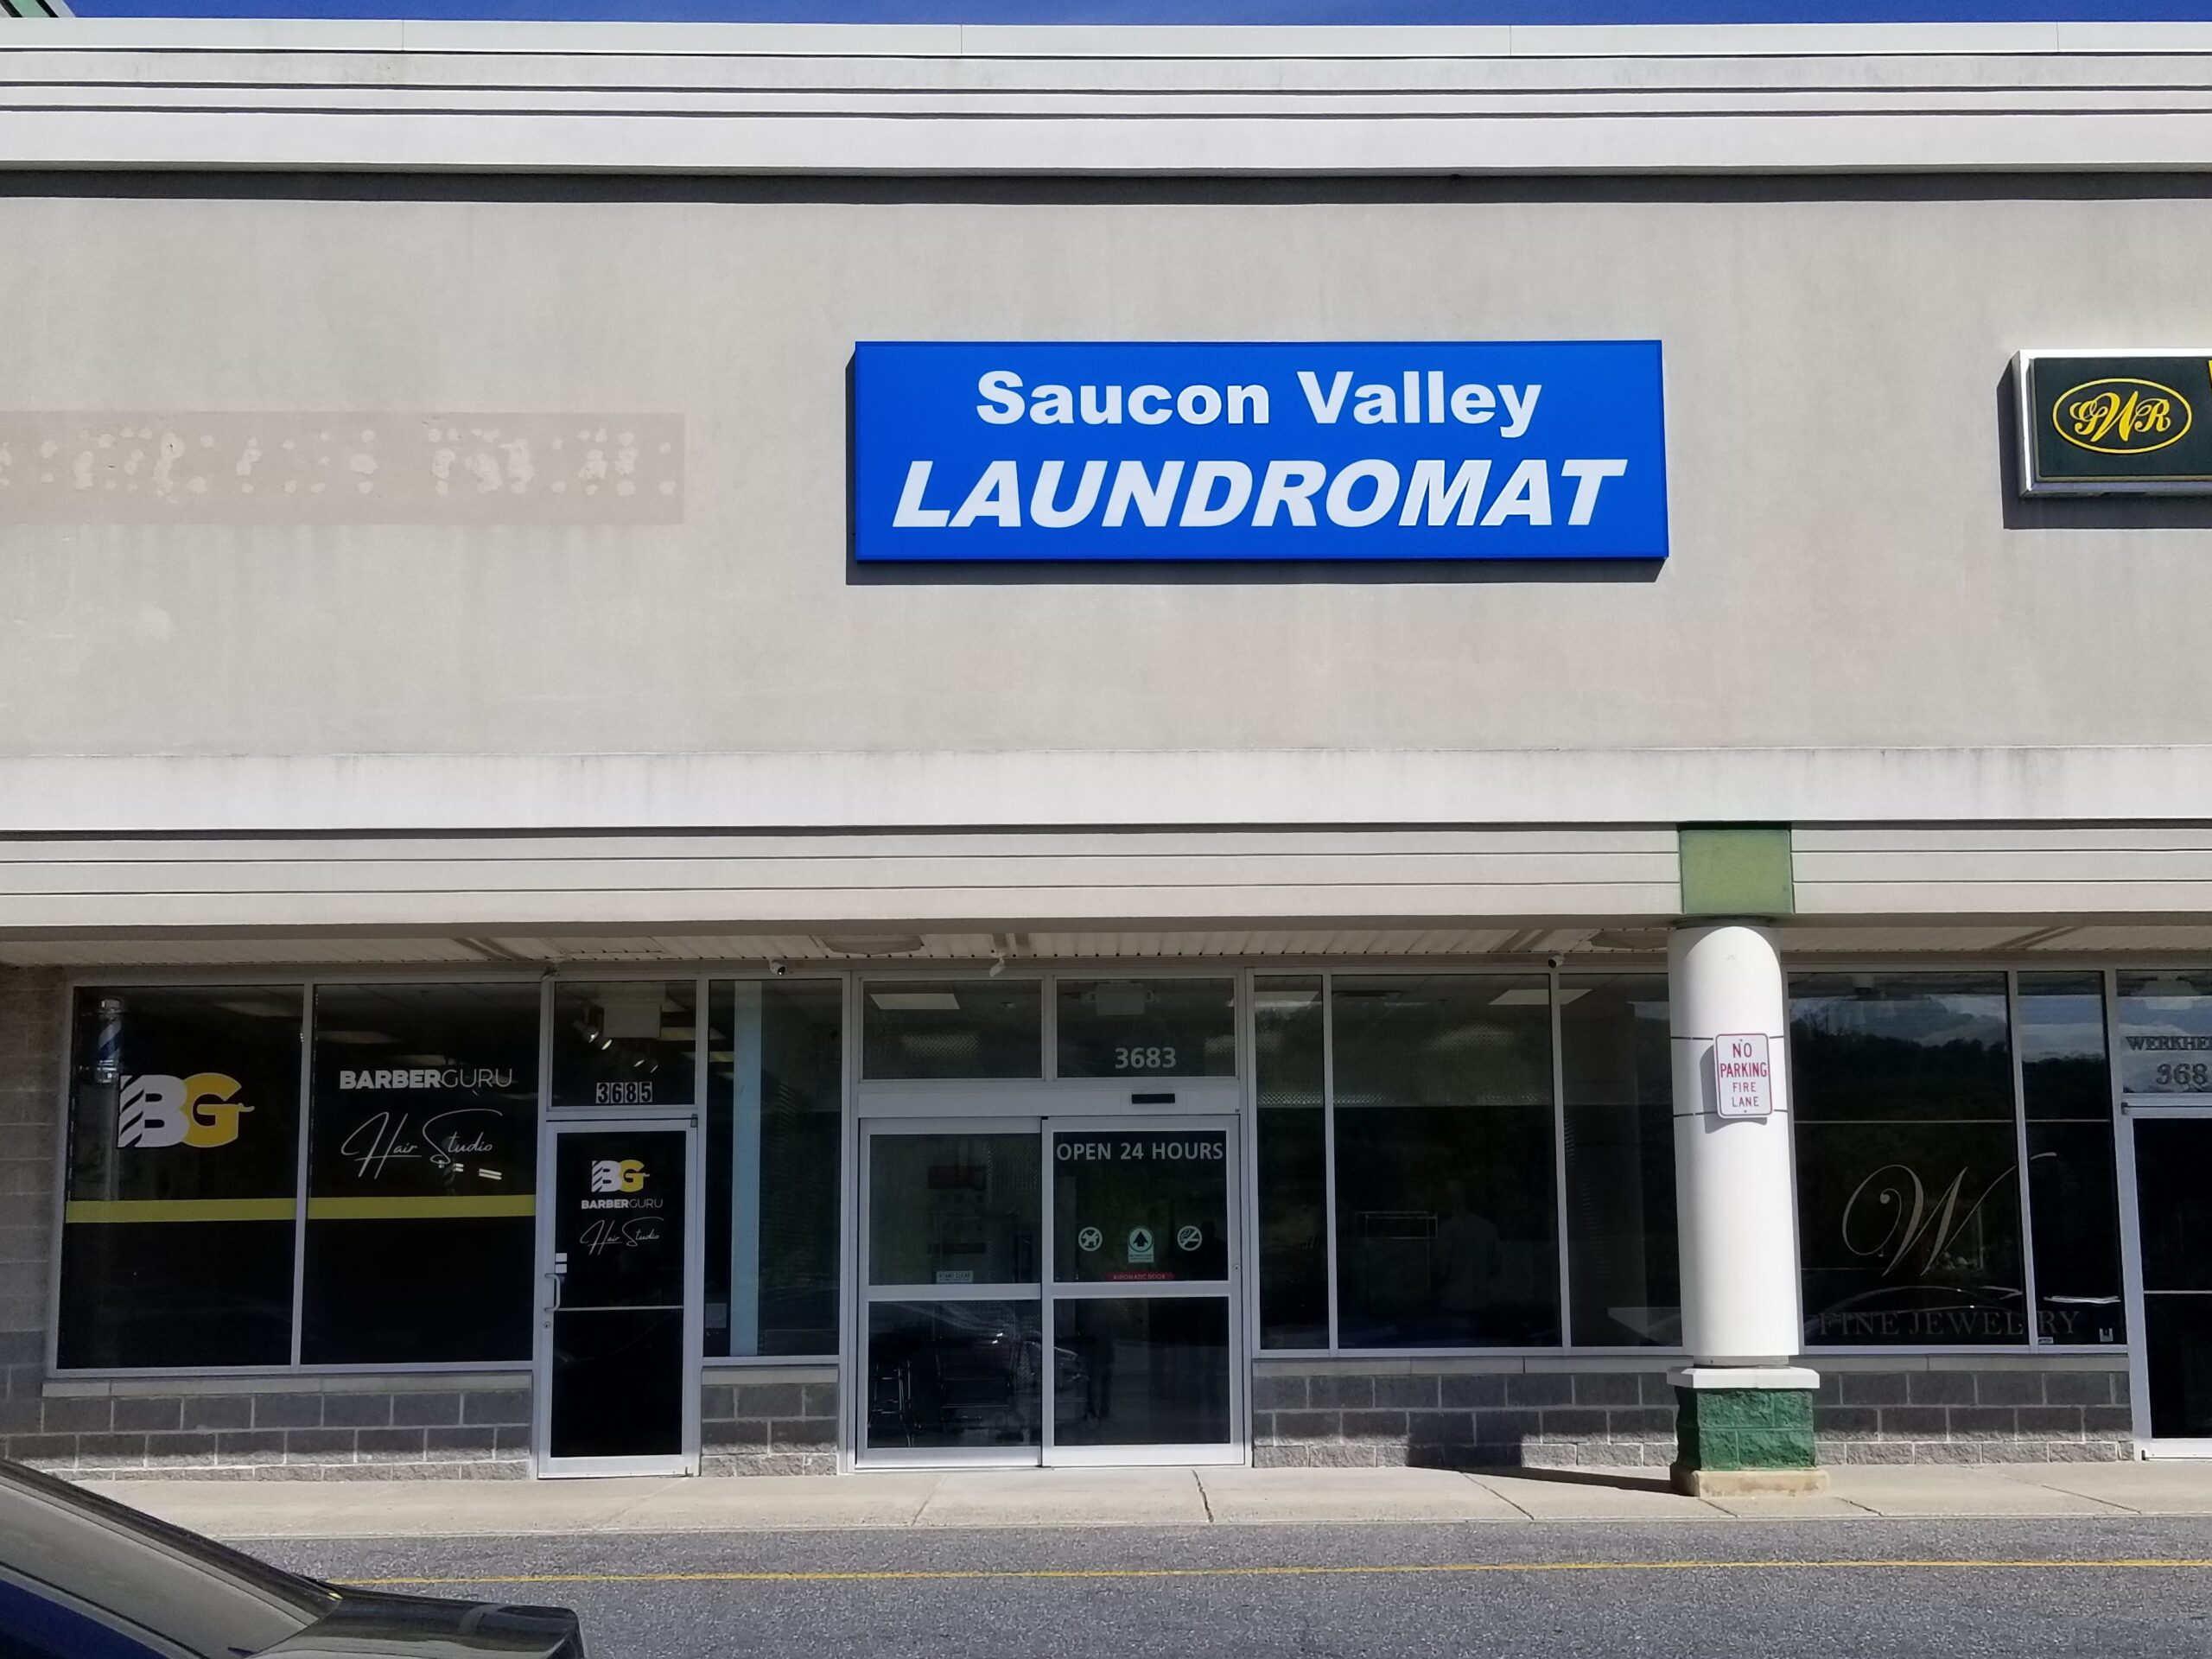 Damariscotta Laundromat Gets New Owners, Upgrades - The Lincoln